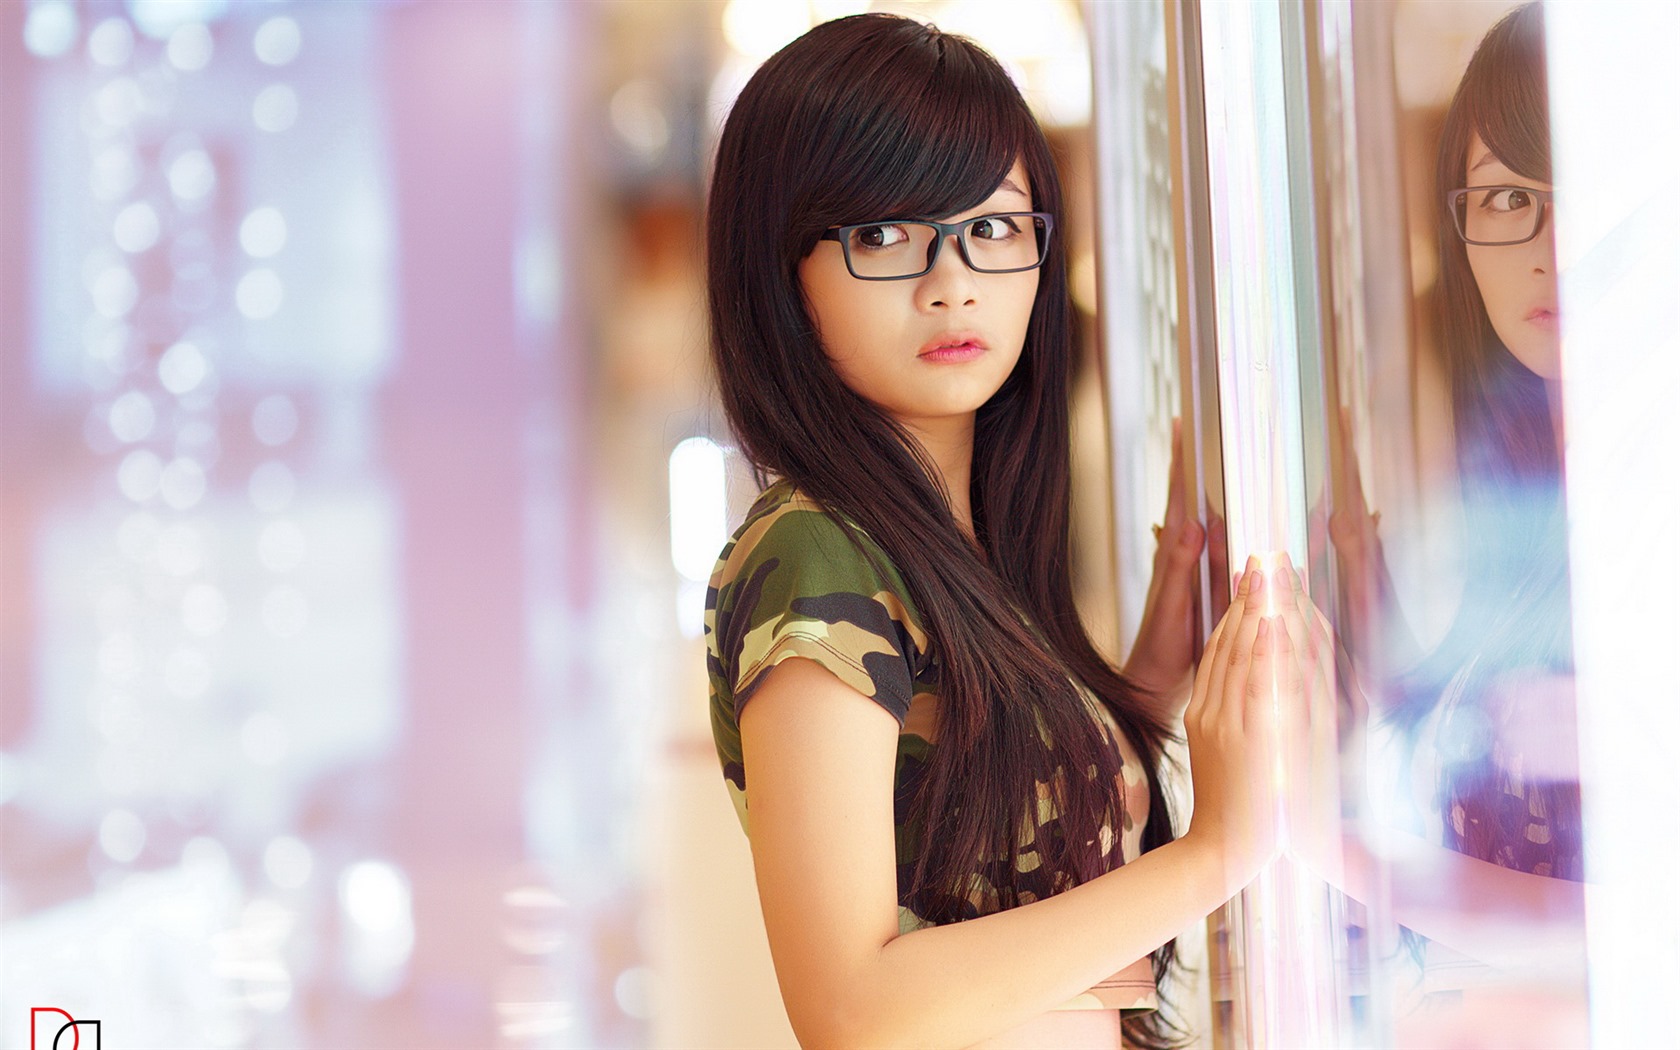 Pure and lovely young Asian girl HD wallpapers collection (3) #36 - 1680x1050